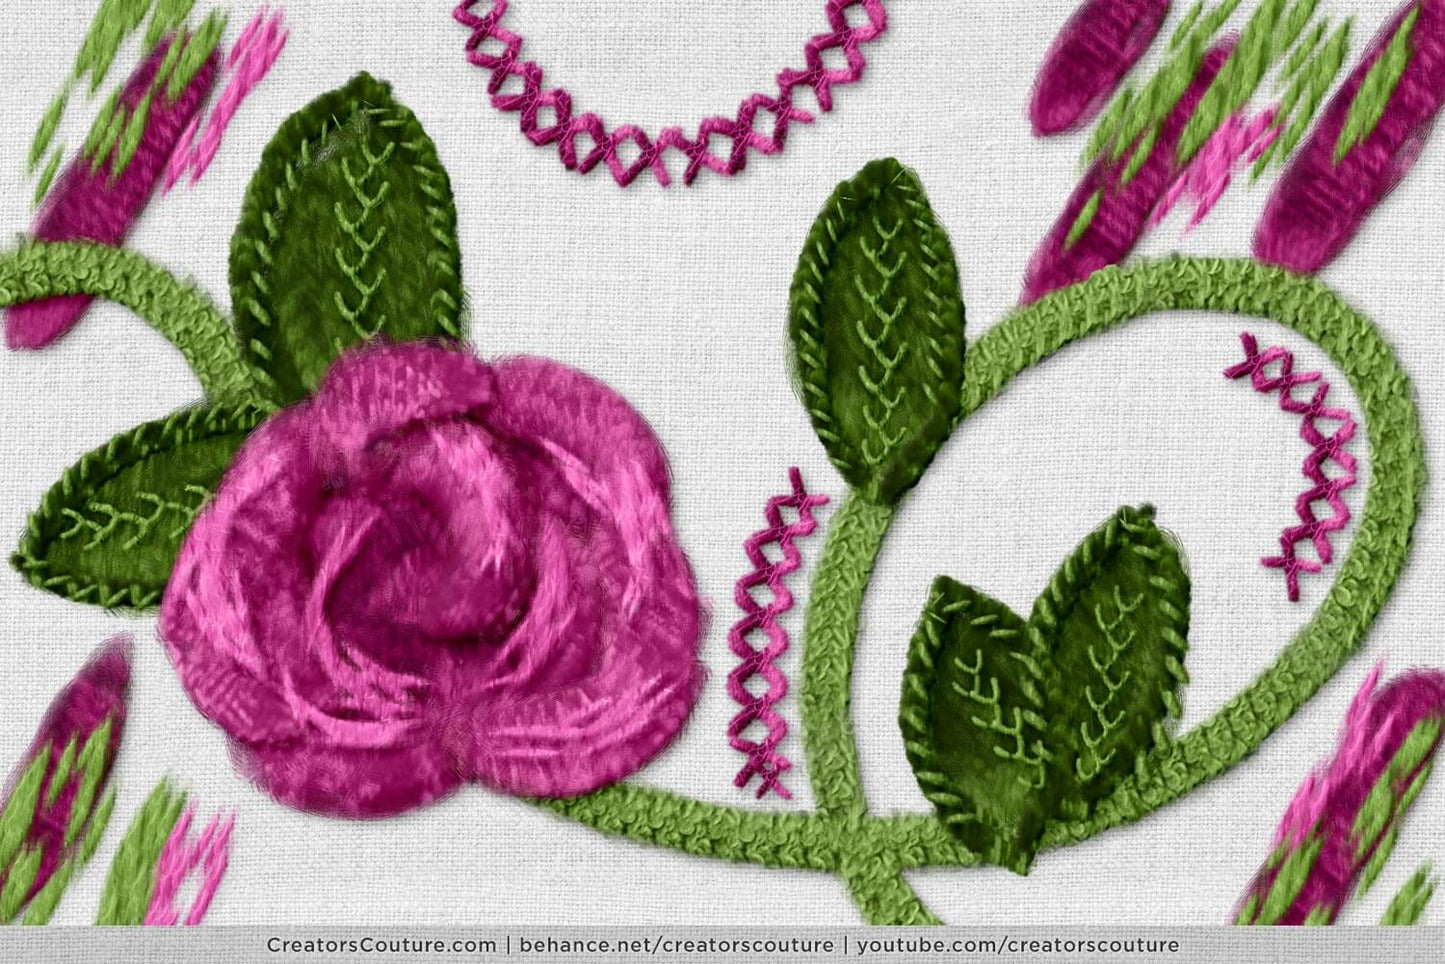 dimensional fabric and thread rose illustration, embroidered effect created in Photoshop